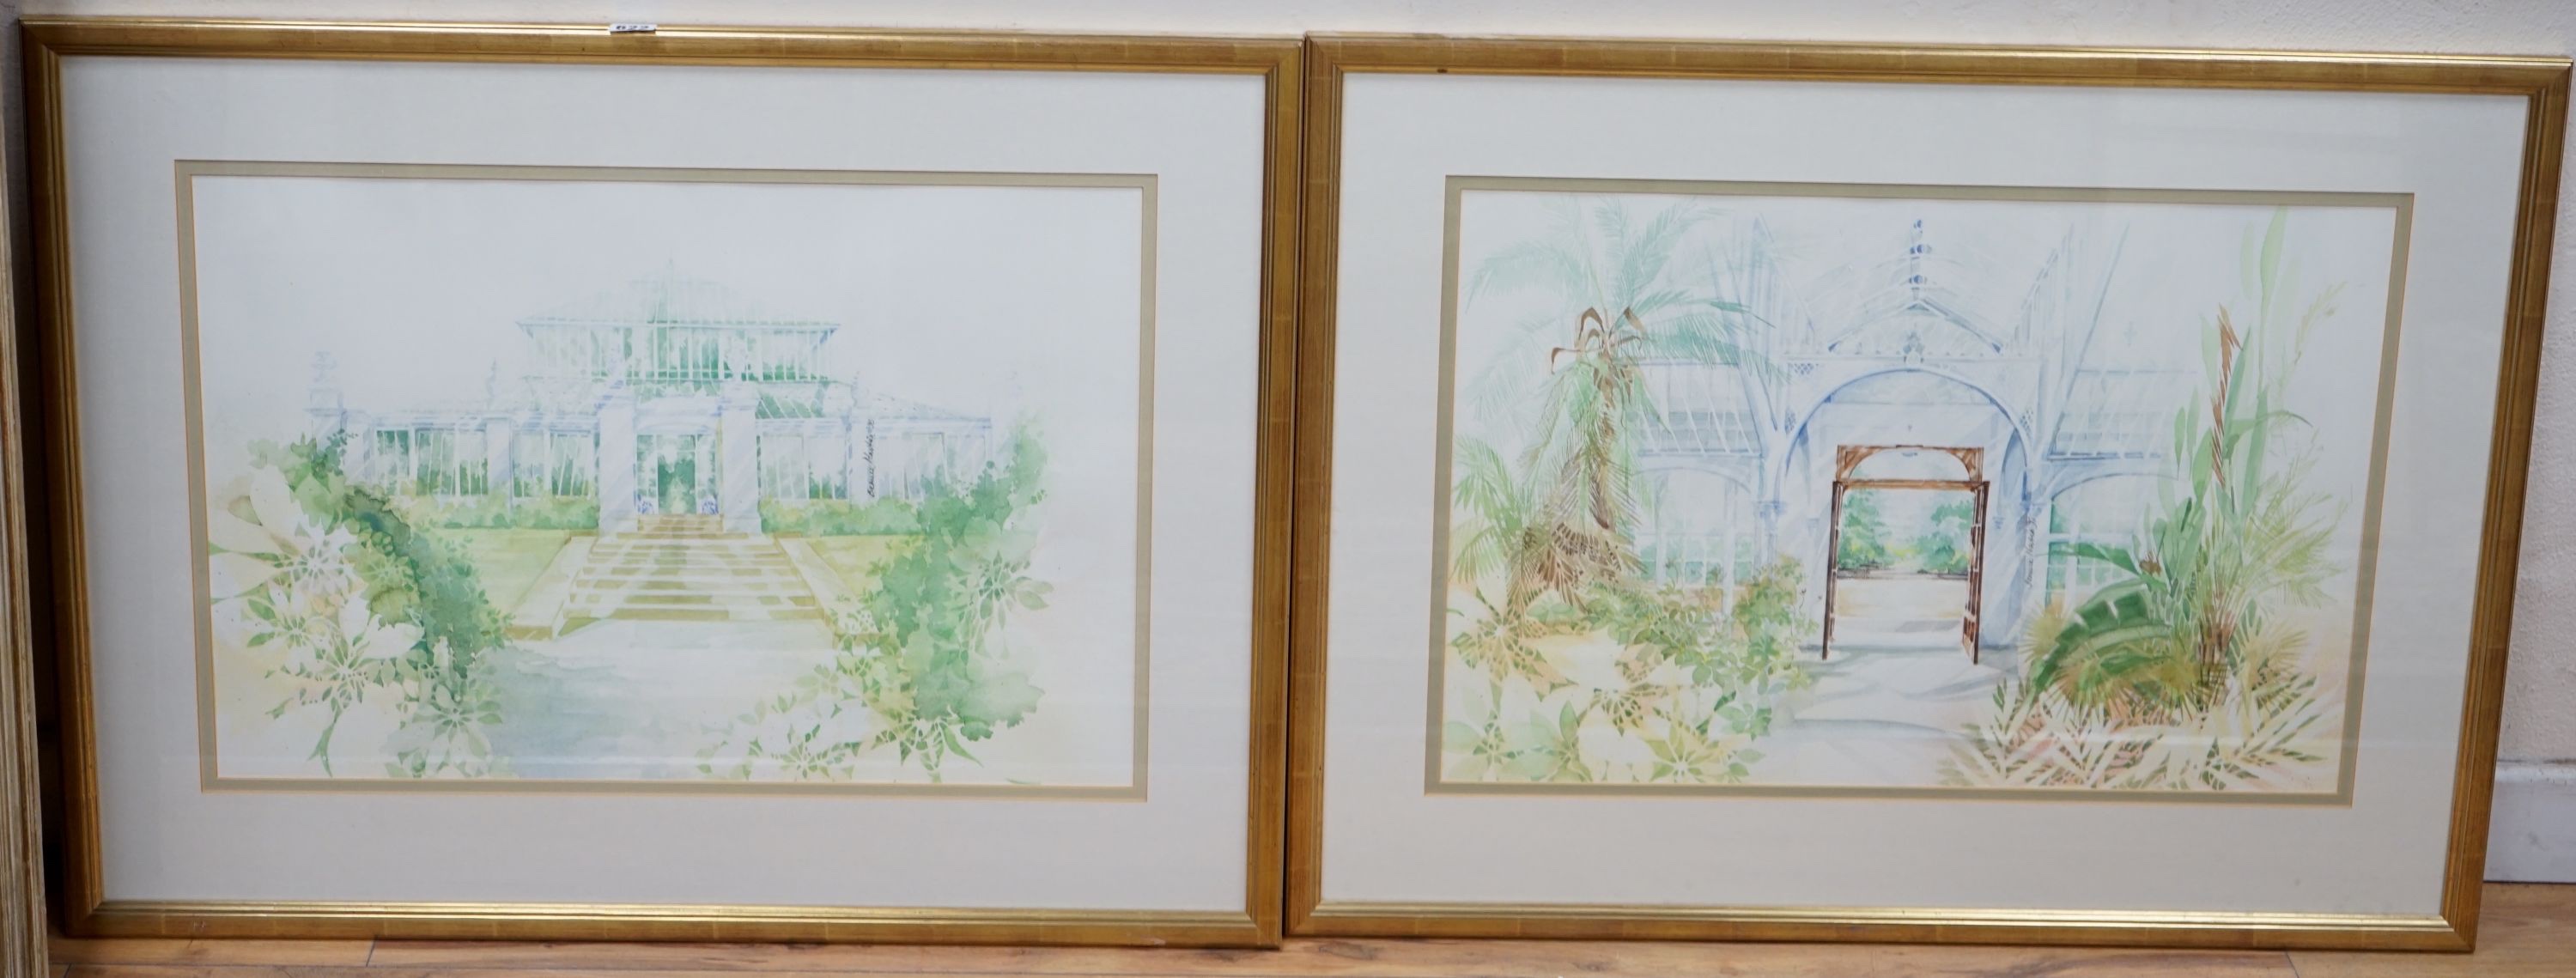 Bernice Martin, pair of watercolours, Kew Series I and 2, signed and dated '90, 44 x 65cm